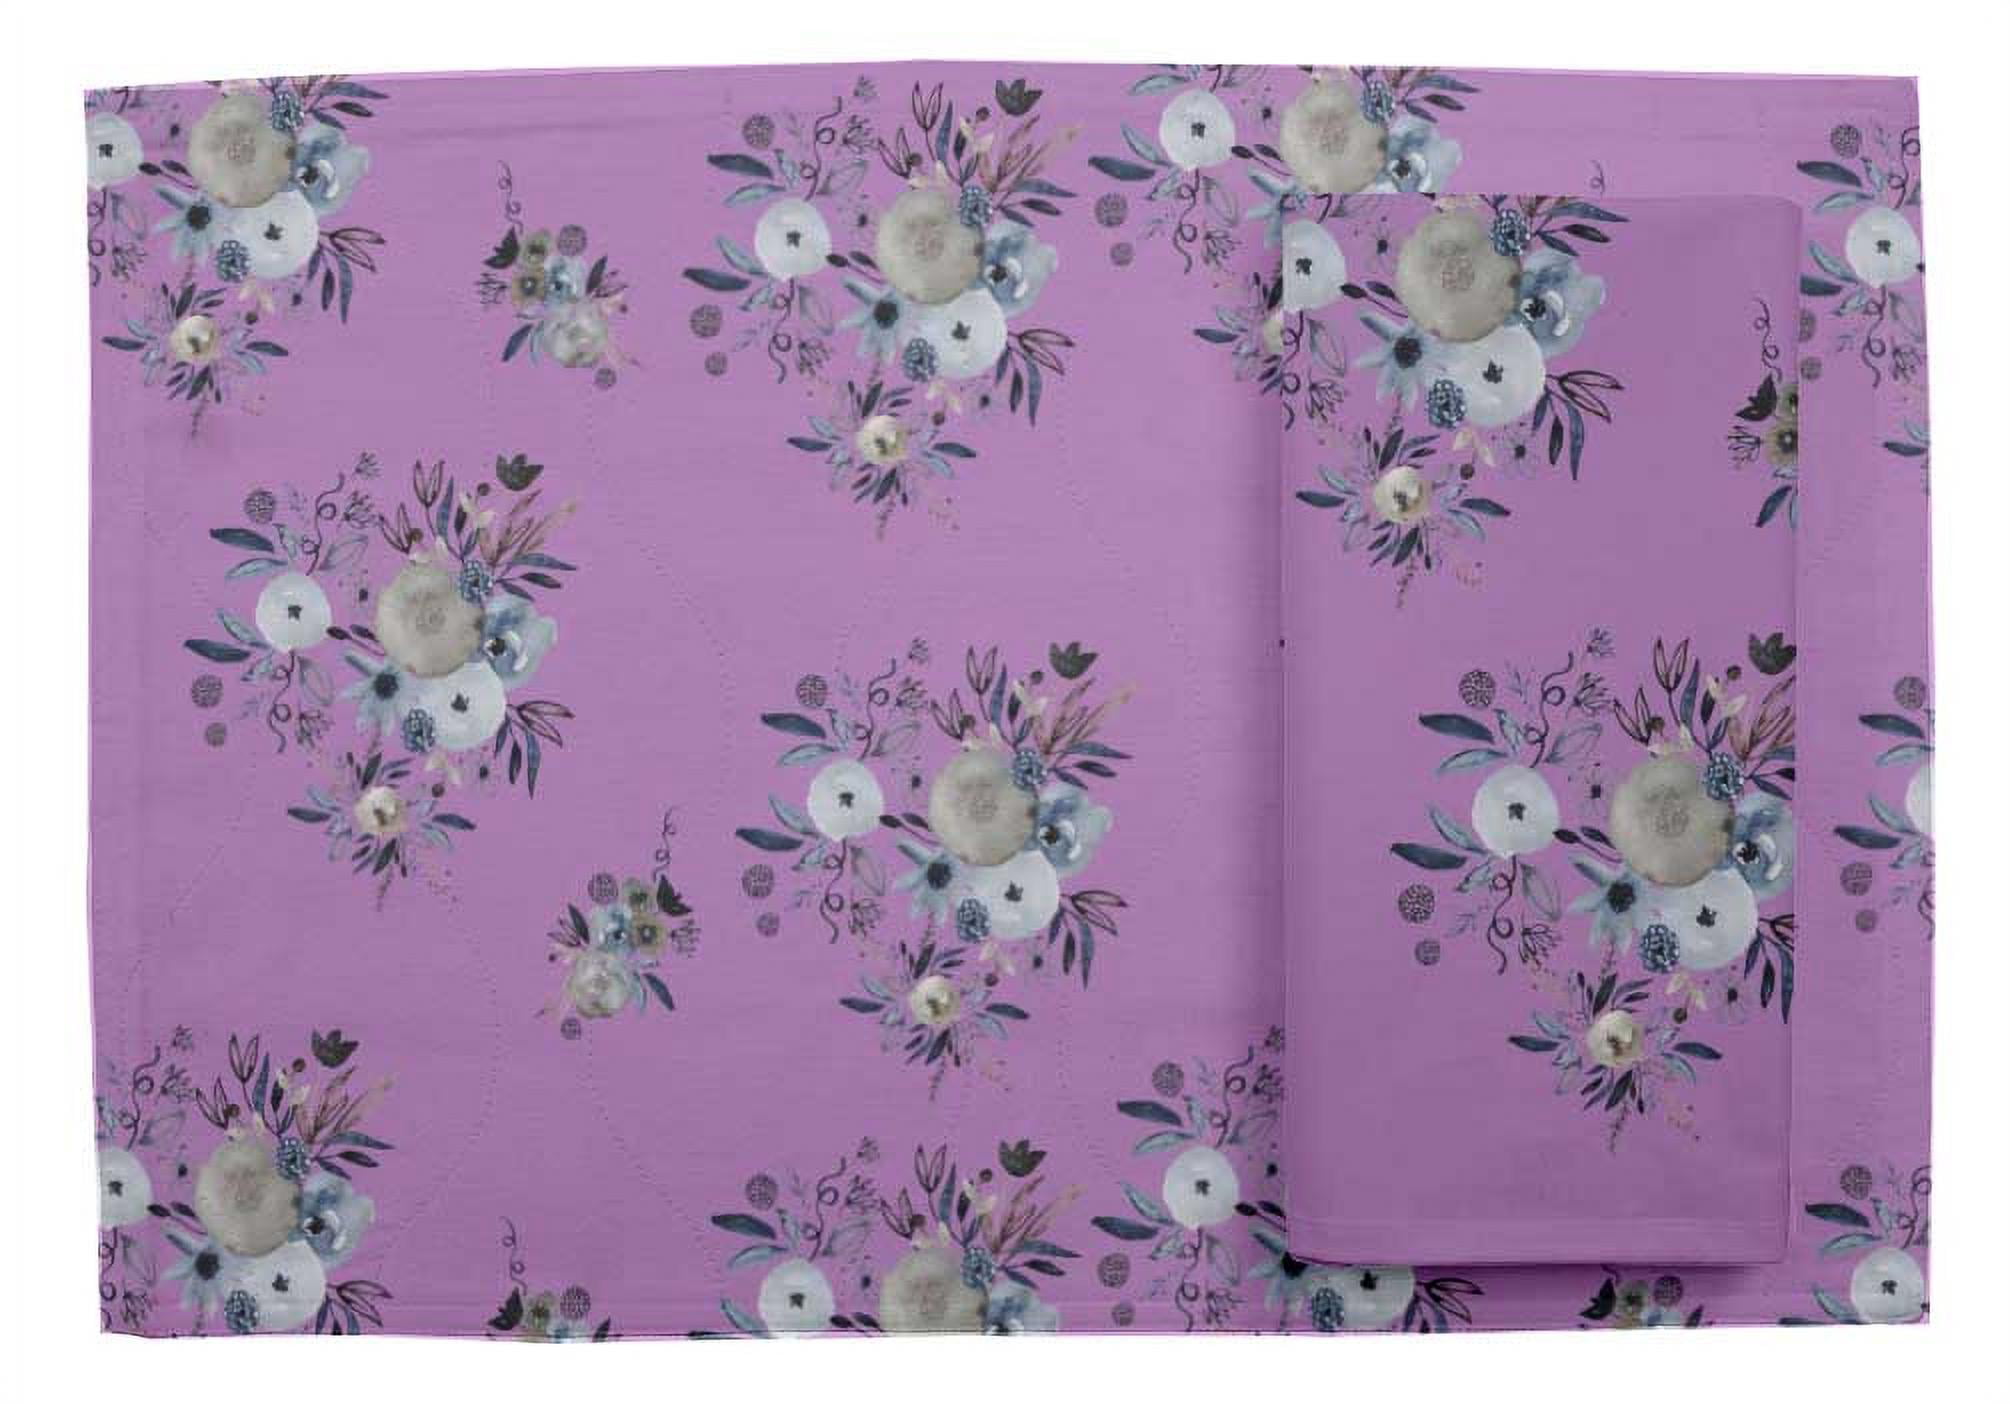 Details about   S4Sassy Wreath & Anemone Floral Placemats With Napkins Table Decor-FL-870C 